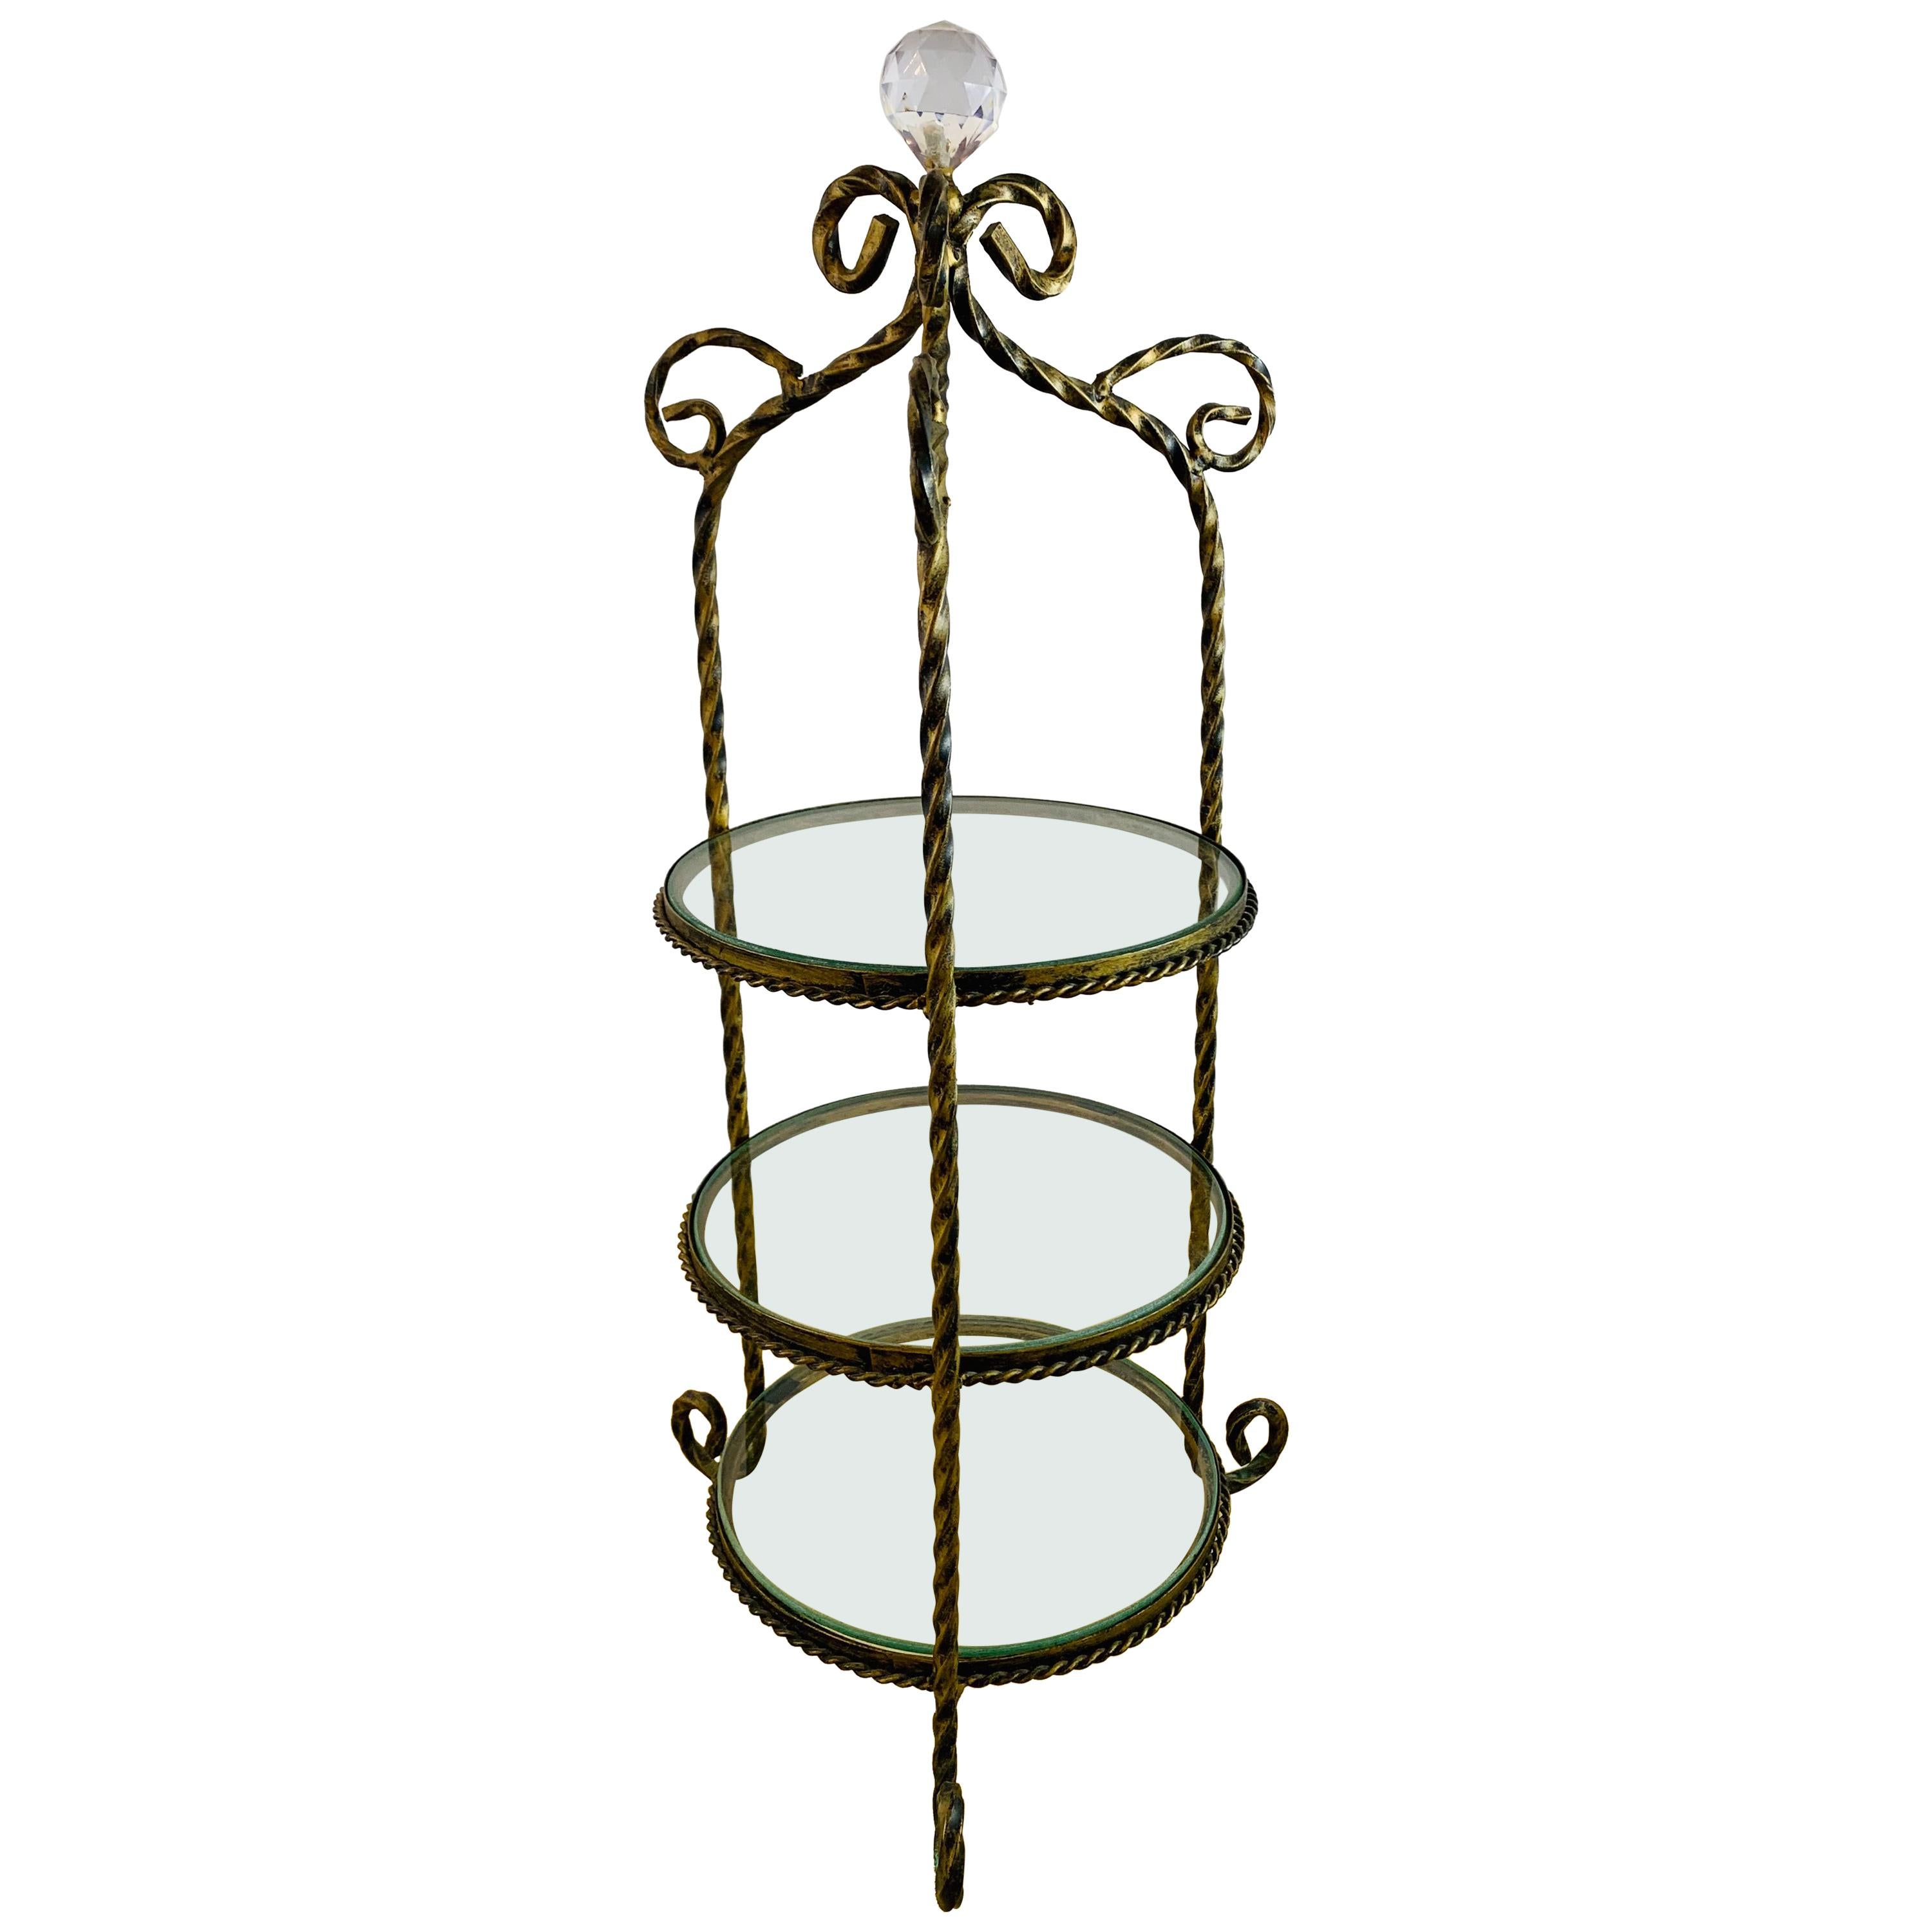 Diminutive French Wrought Iron Decorative Étagère with Round Glass Shelves